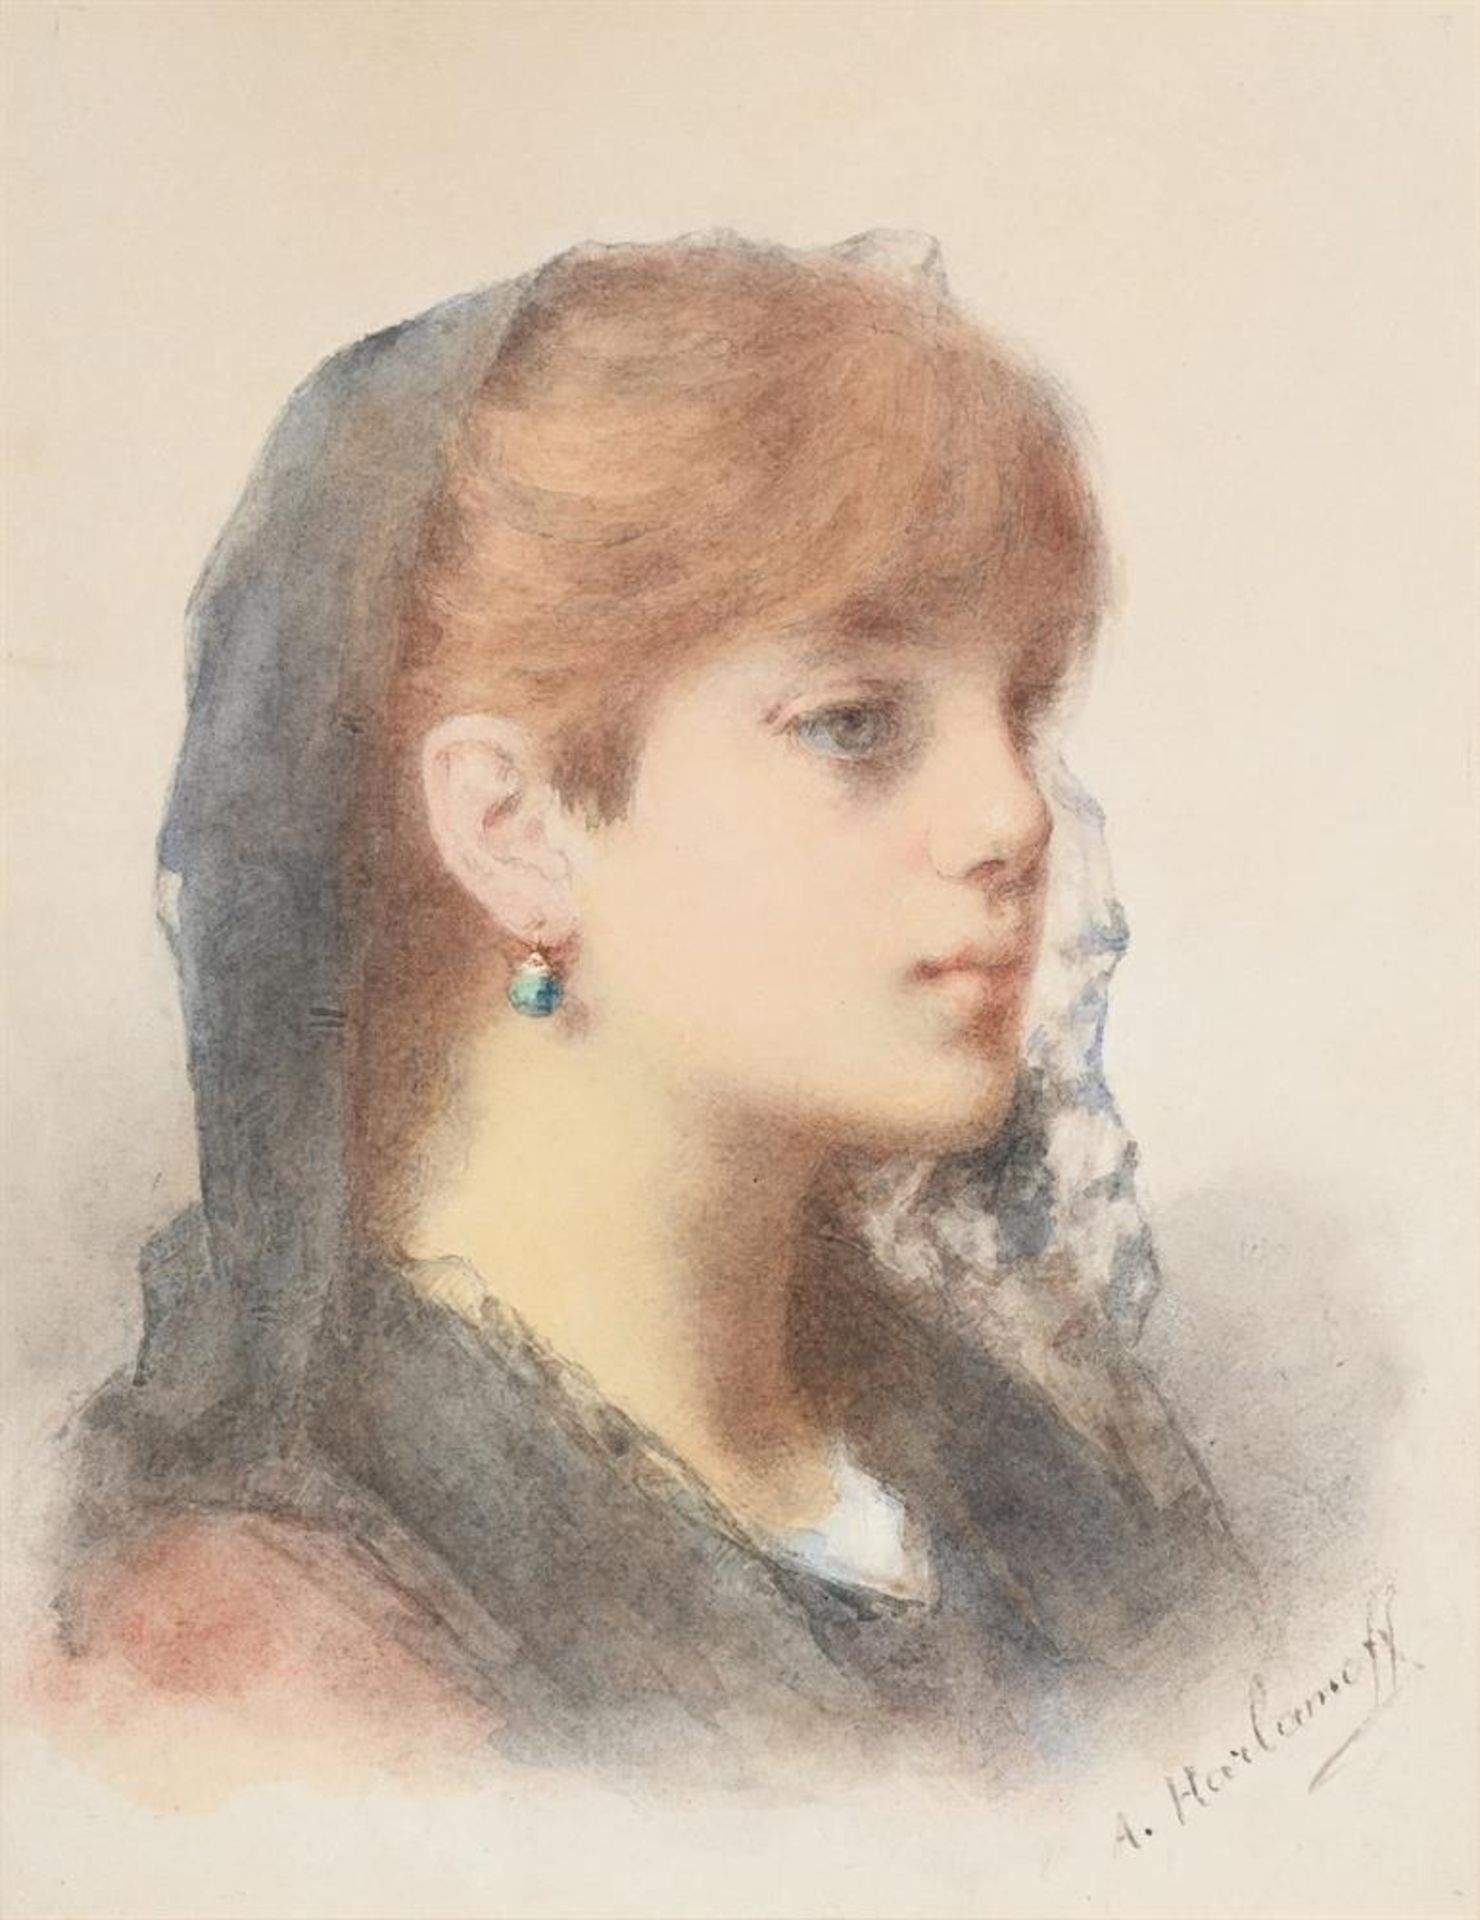 ALEXEI ALEXEIEVICH HARLAMOFF (RUSSIAN 1840 - 1945), HEAD OF A YOUNG WOMAN